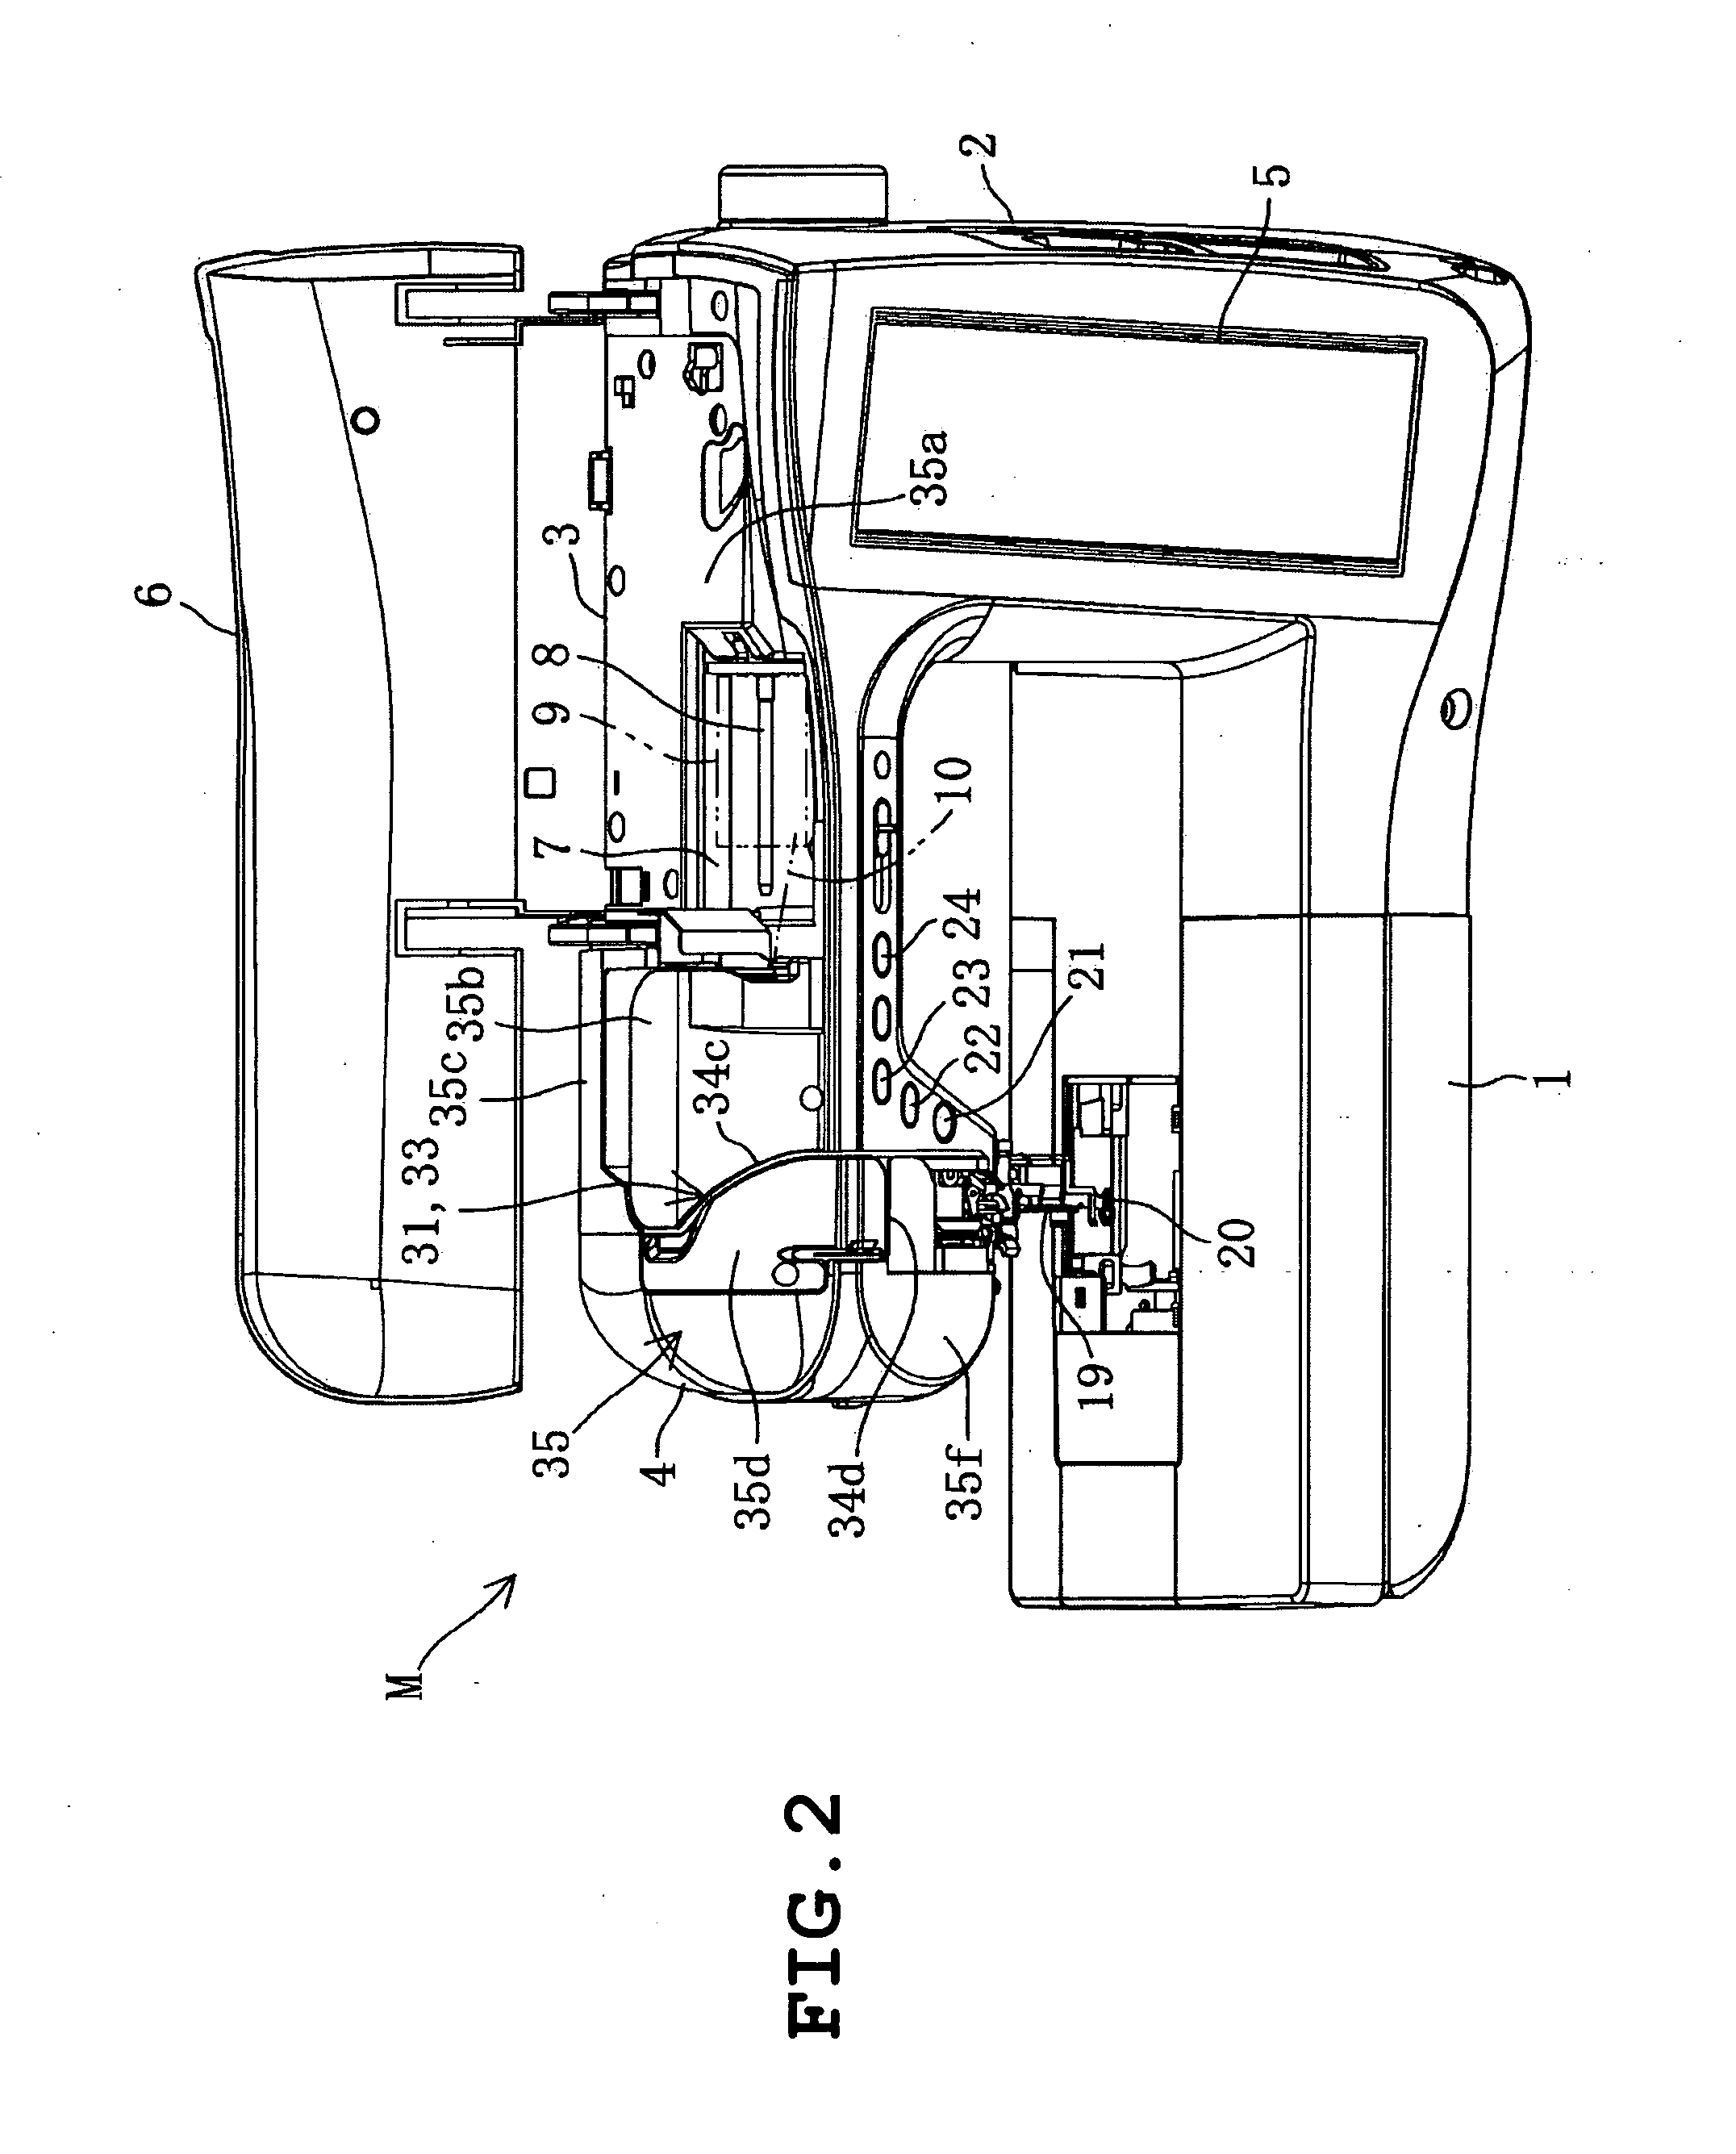 Sewing machine with automatic threading mechanism